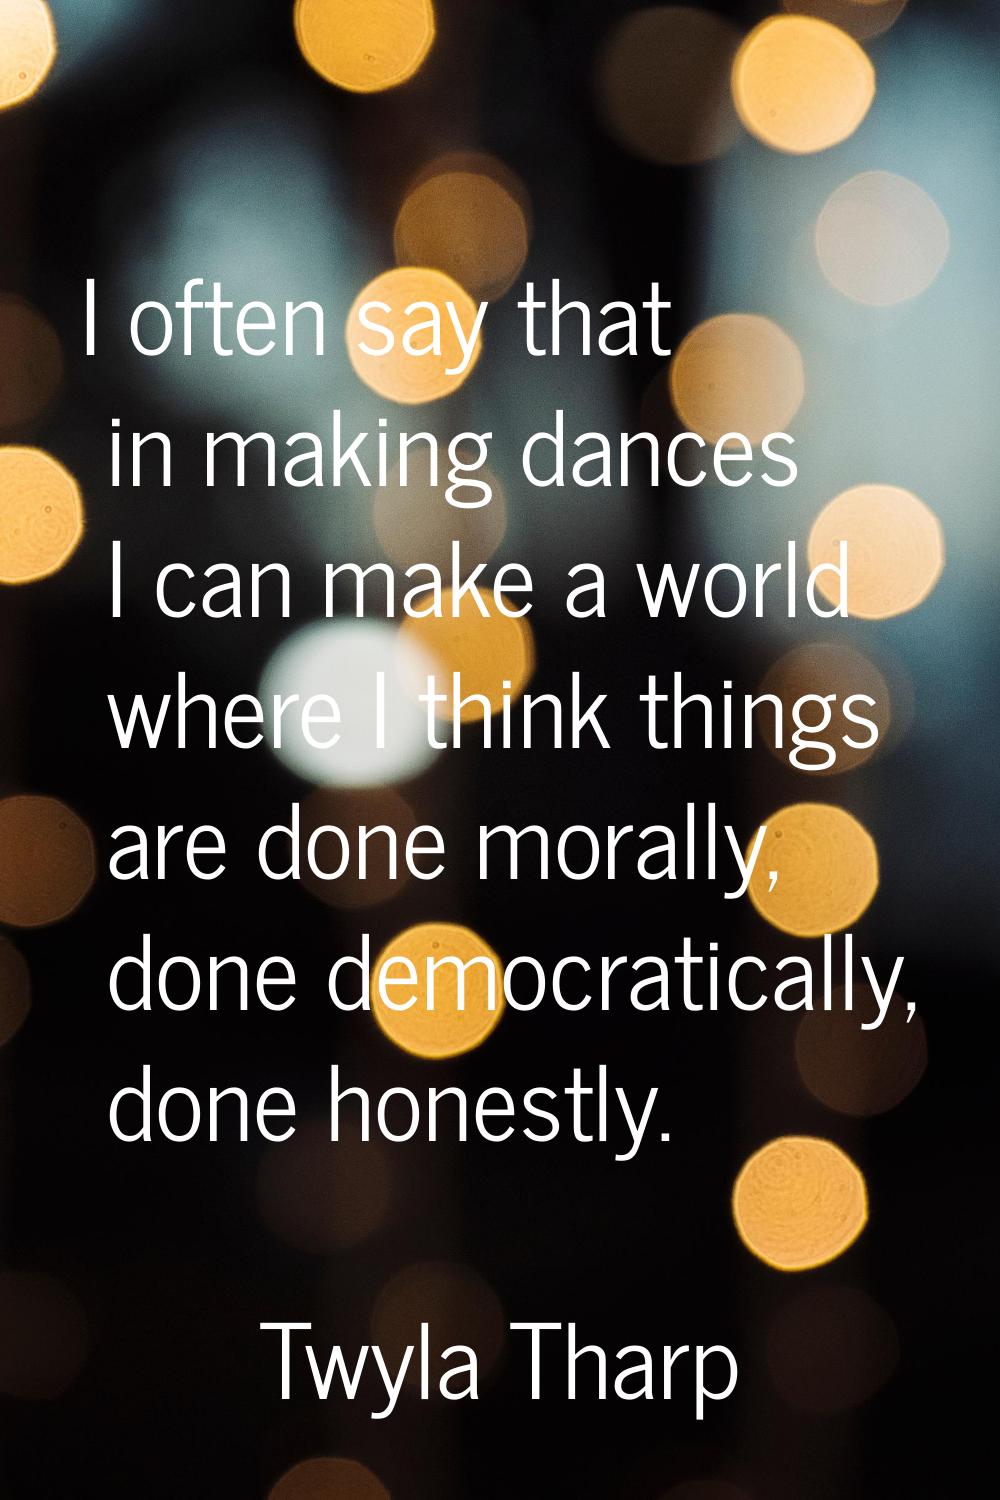 I often say that in making dances I can make a world where I think things are done morally, done de